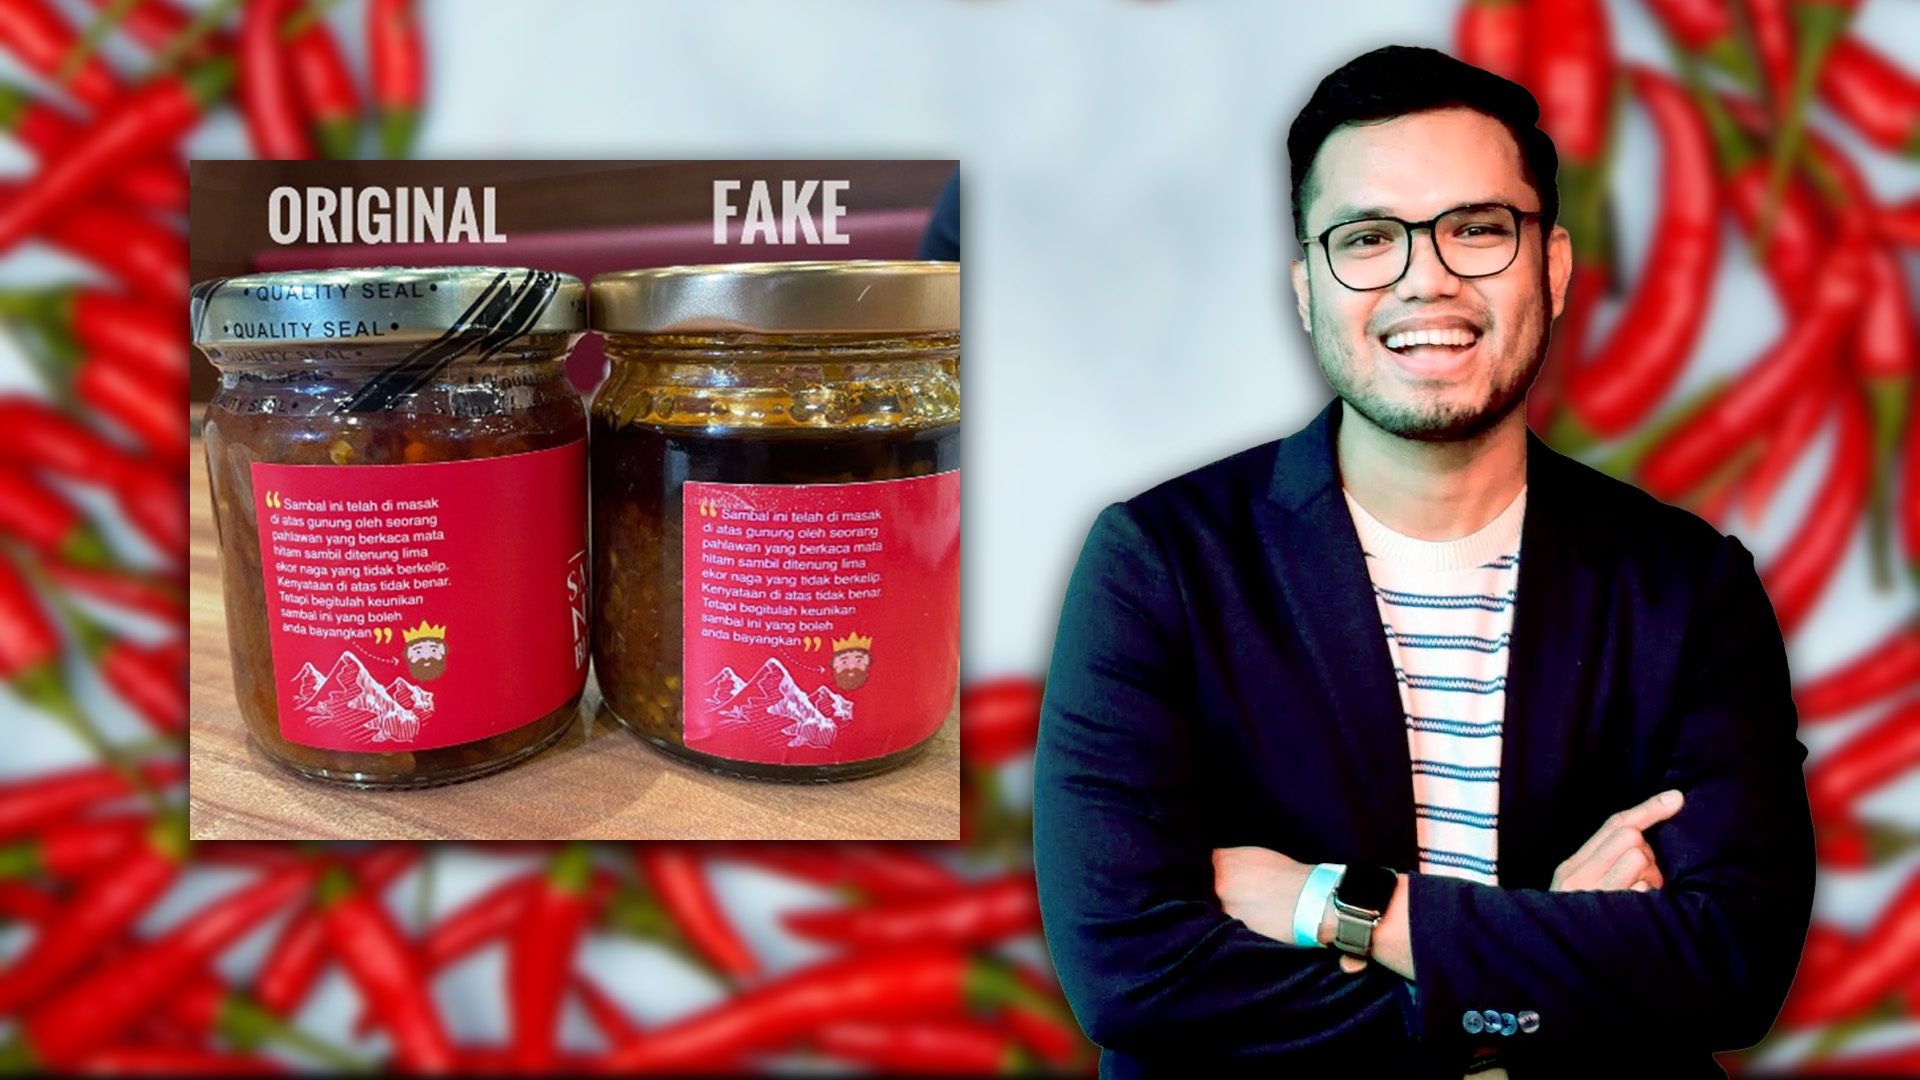 You're toast: Khairul Aming to dish out lawsuit against Sambal Nyet Khairi owner